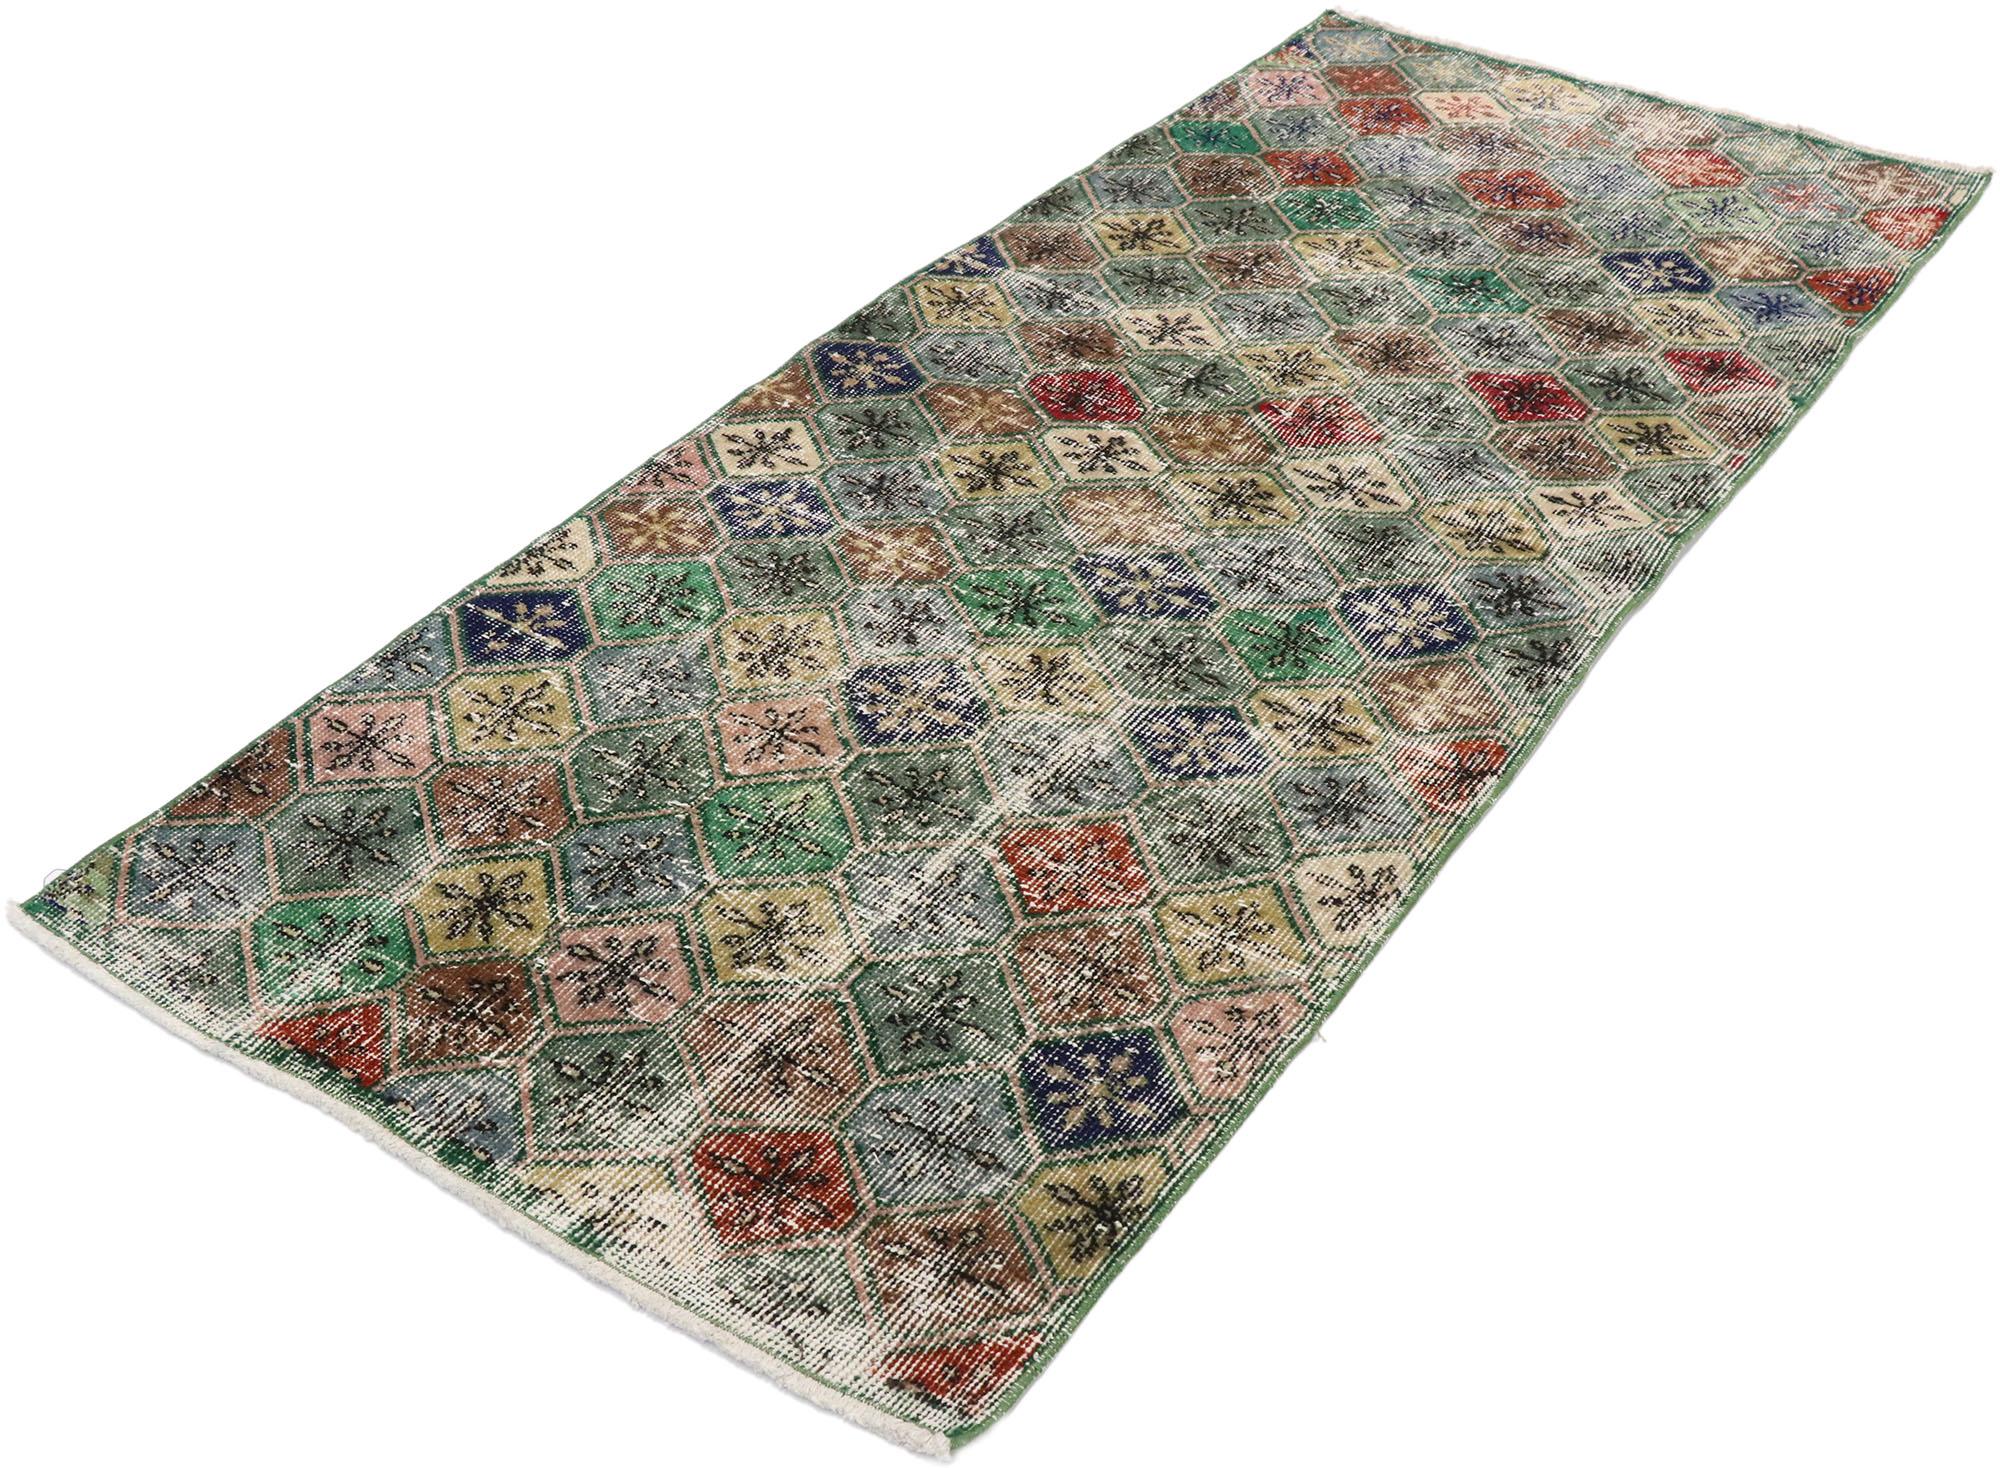 53372, distressed vintage Turkish Sivas rug with Rustic English Country style. This hand knotted wool distressed vintage Turkish Sivas rug features an attractive all-over lattice pattern comprised of multi-colored hexagons decorated with floral